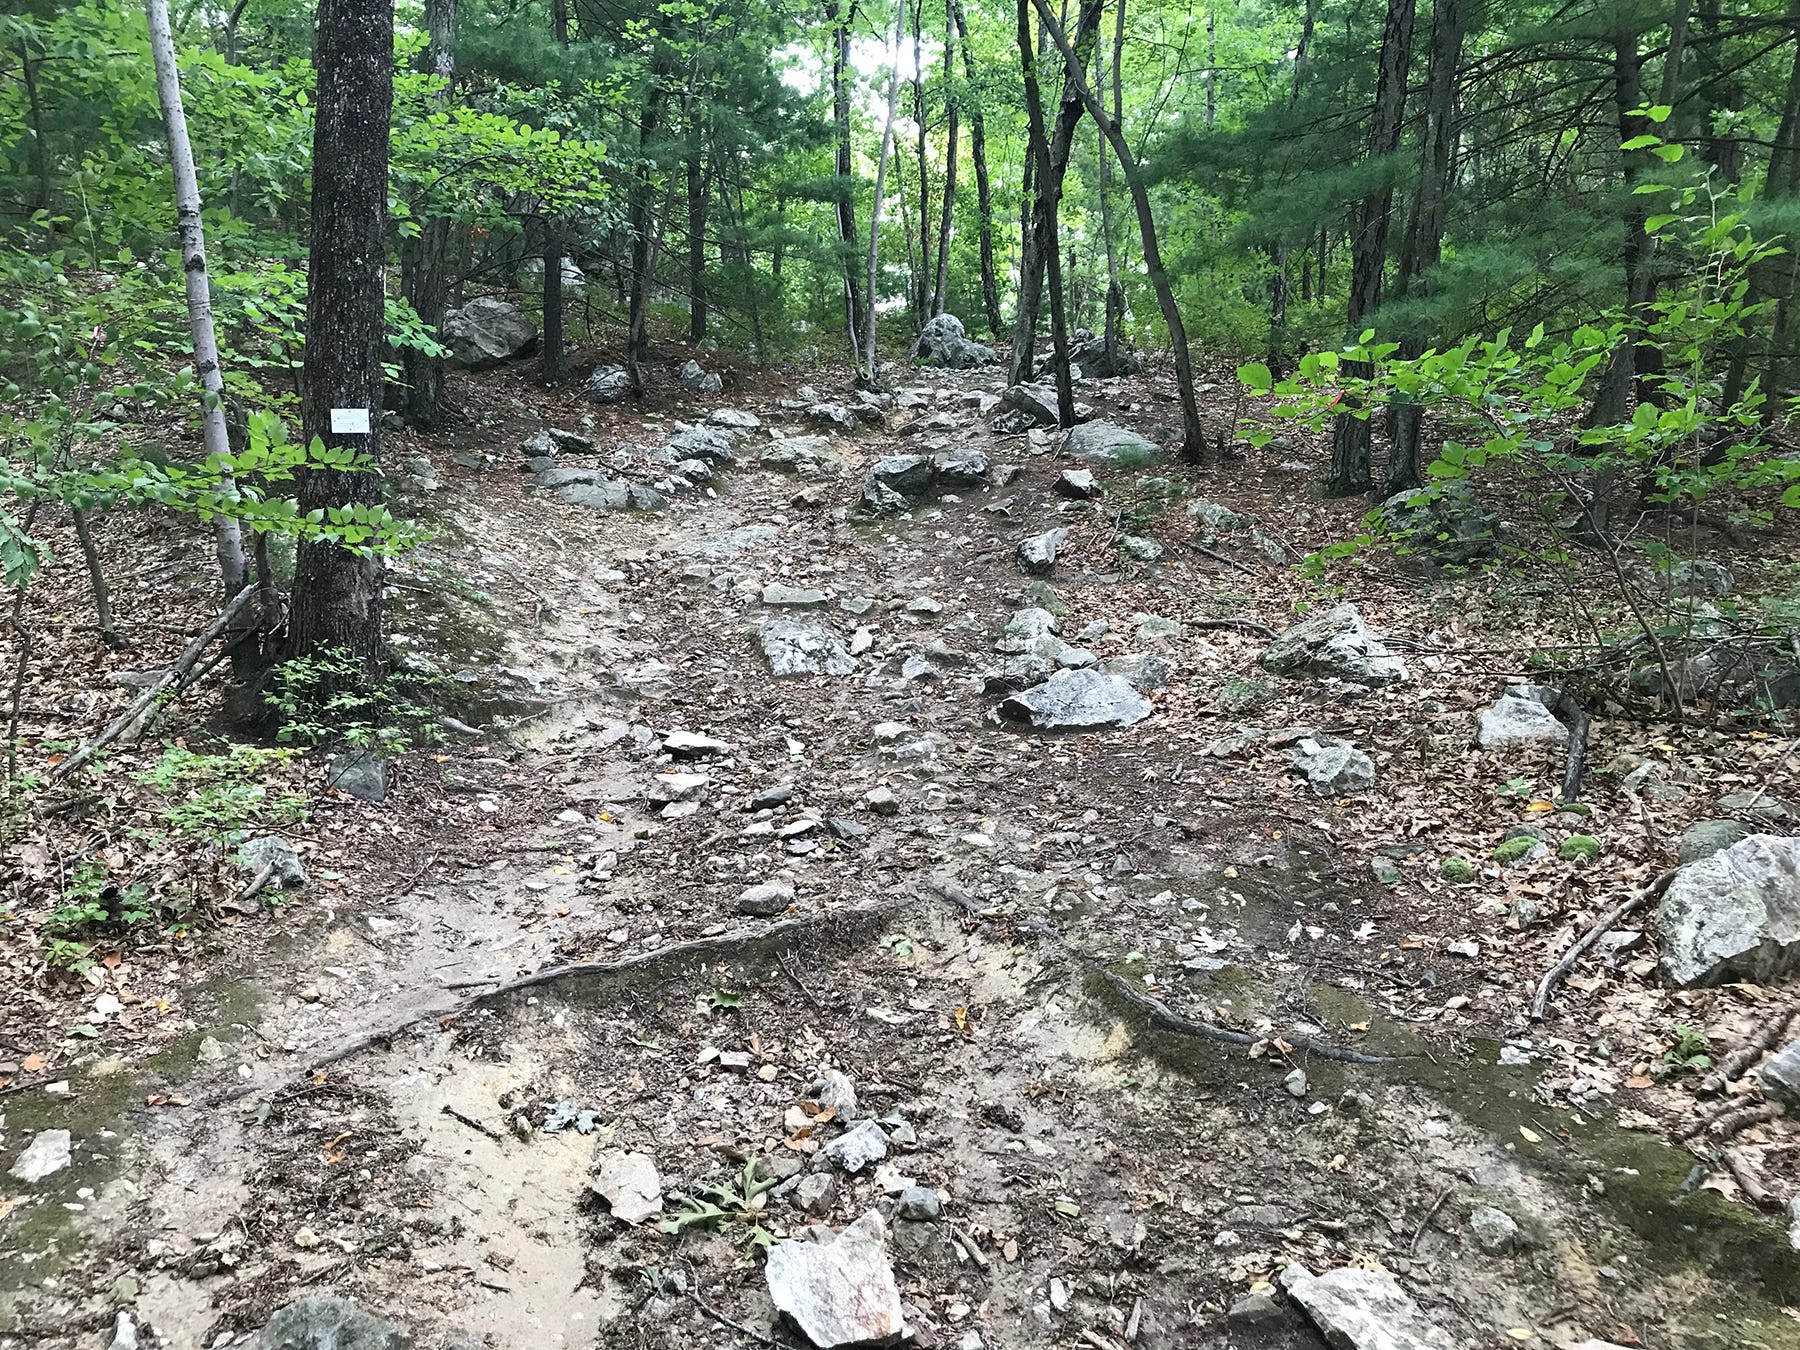 A rocky trail leads uphill through the woods.